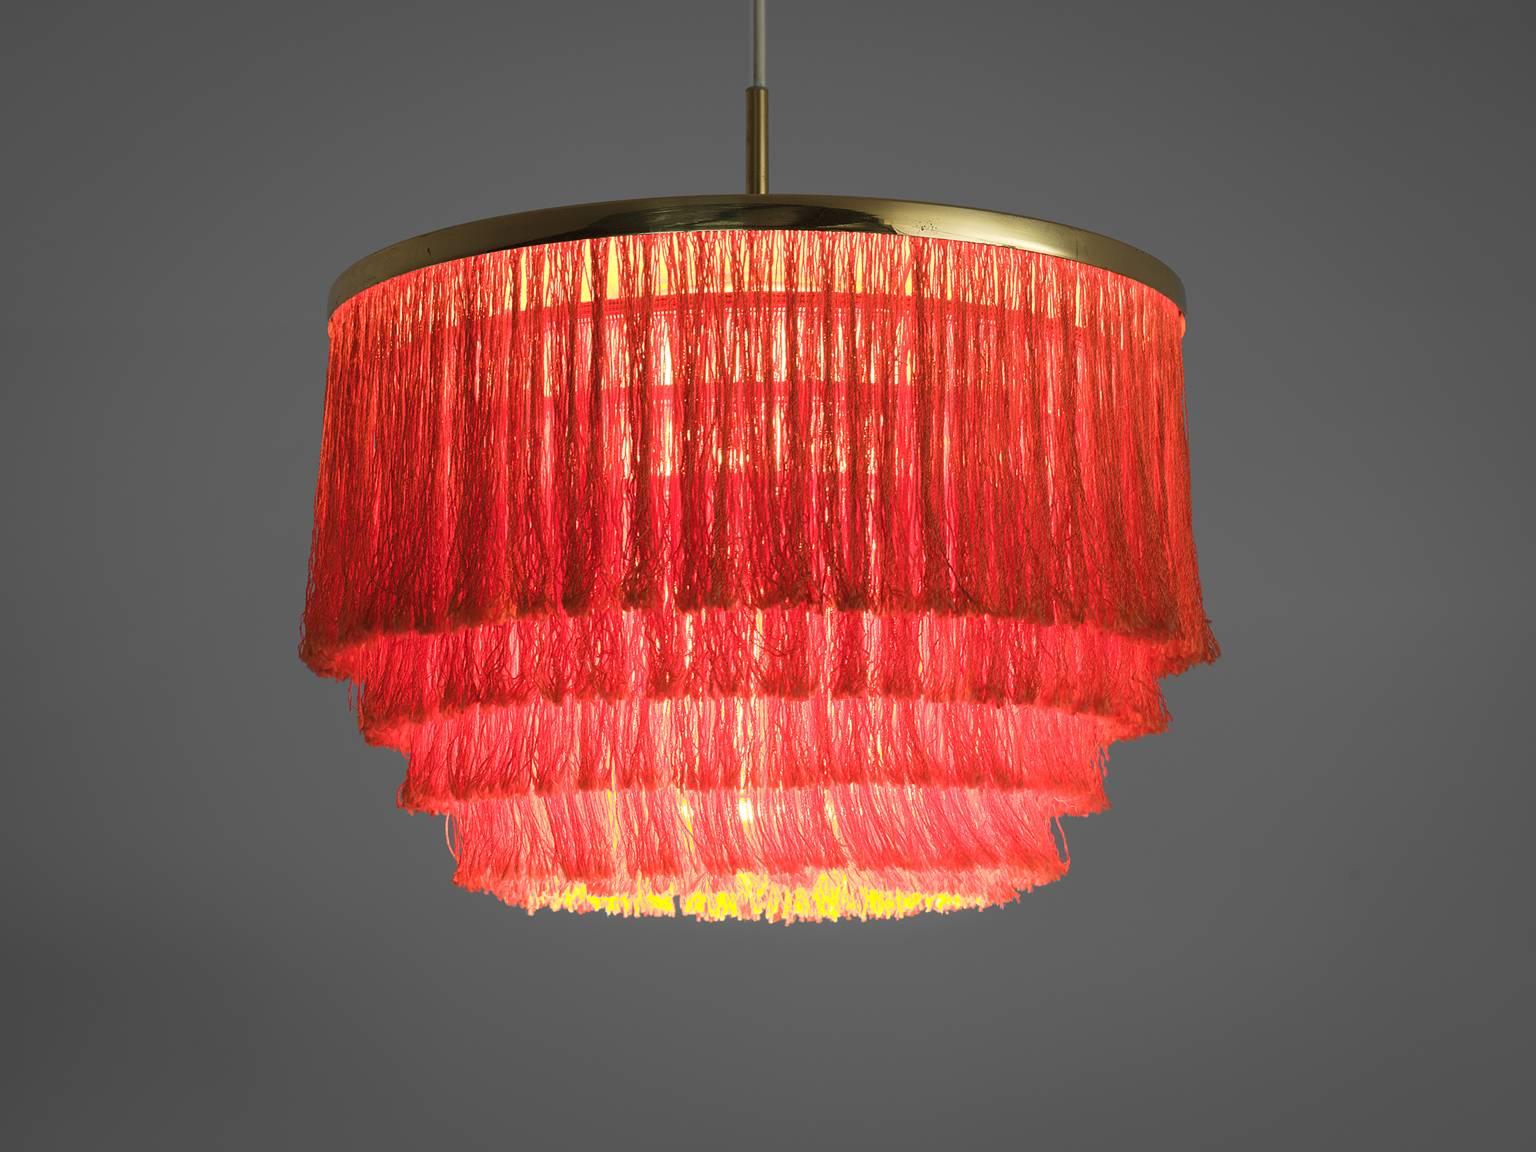 Hans-Agne Jakobsson, chandelier, brass, red silk string, Sweden, 1970s.

This voluptuous chandelier holds a brass frame. The frame has one stem of which rich, layered silk flows. As a result of this material, the light partition is very warm as